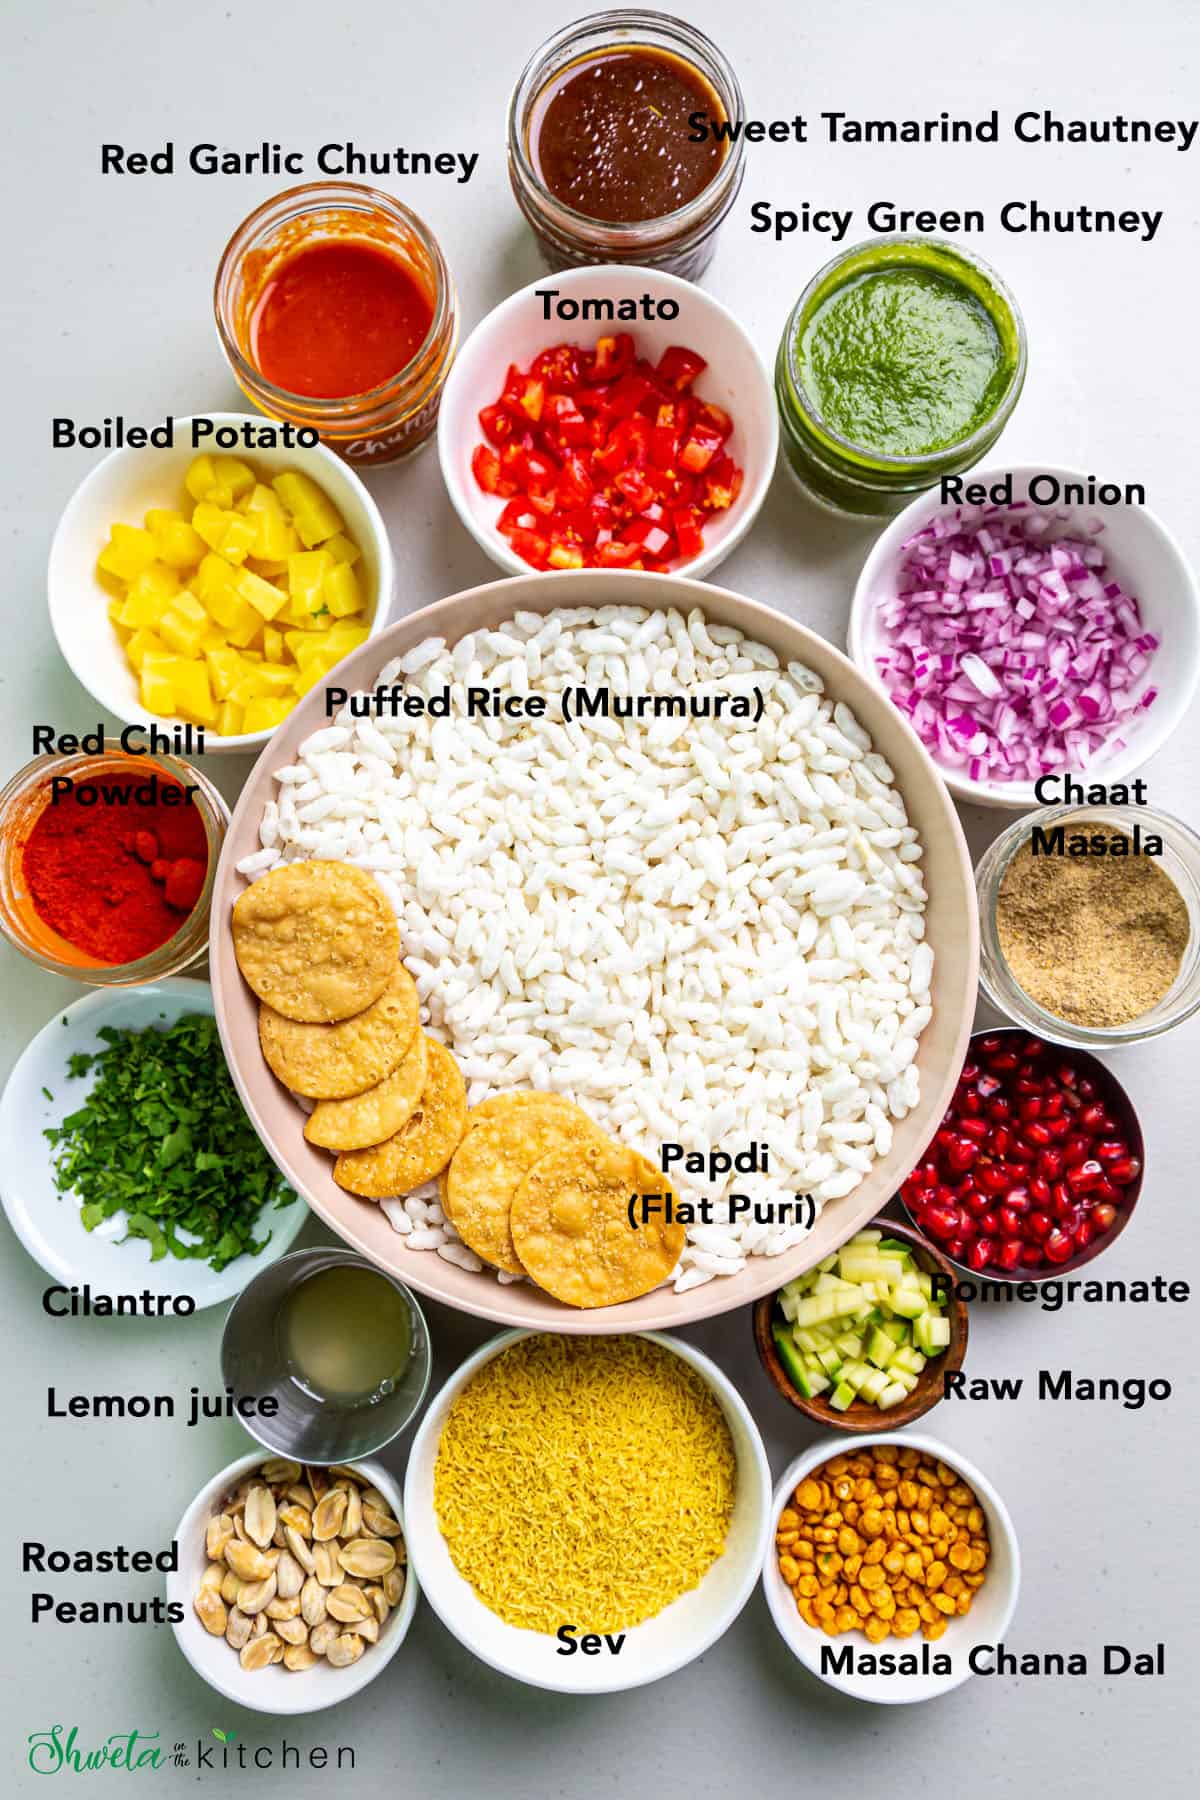 Ingredients for bhel puri arranged in bowls on white surface